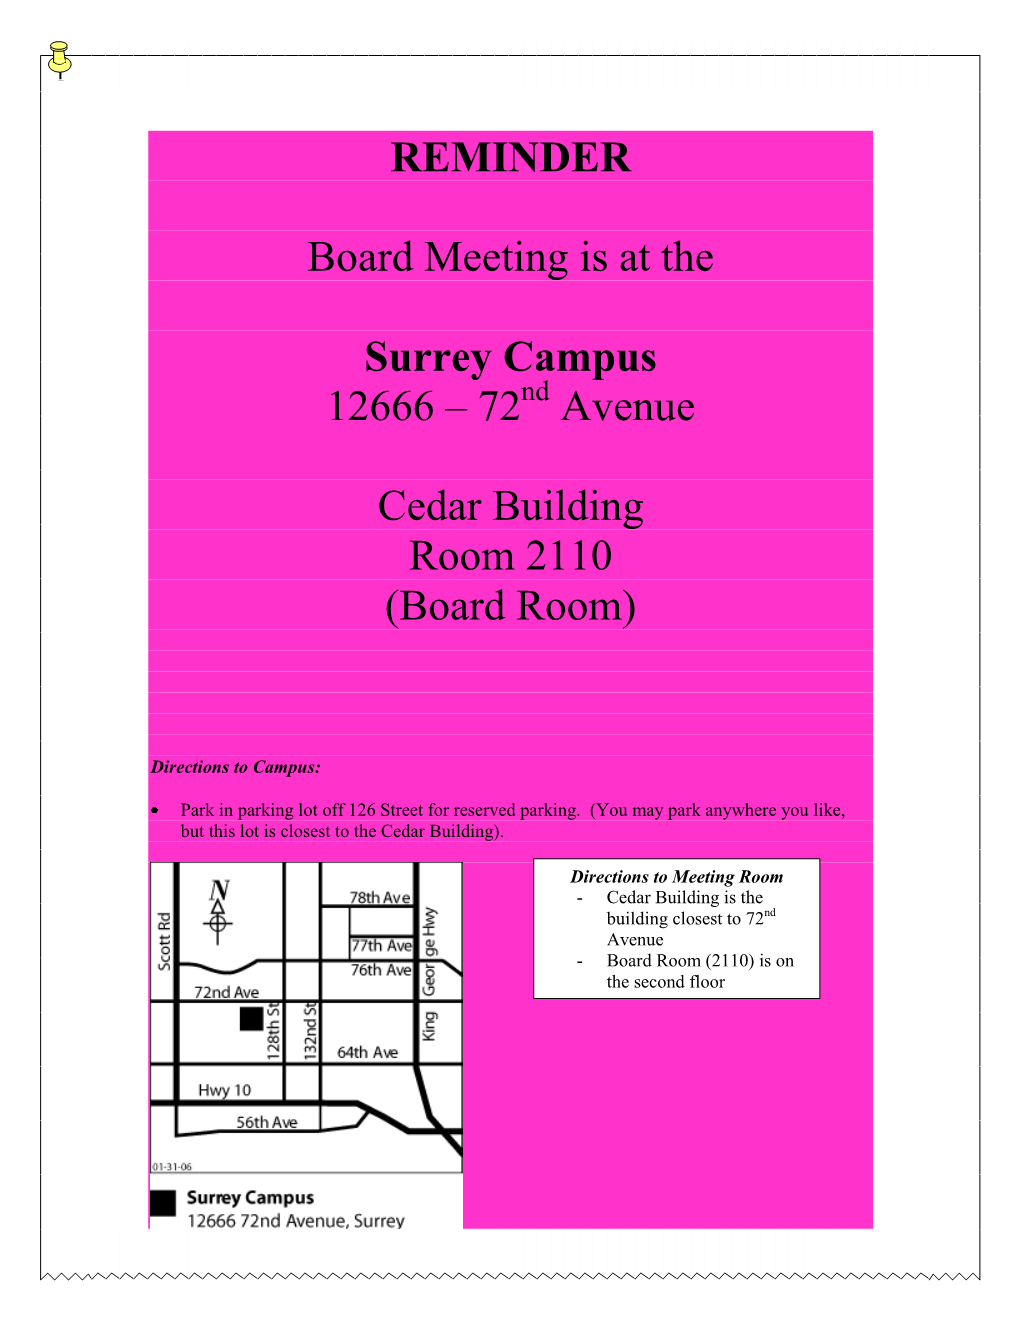 REMINDER Board Meeting Is at the Surrey Campus 12666